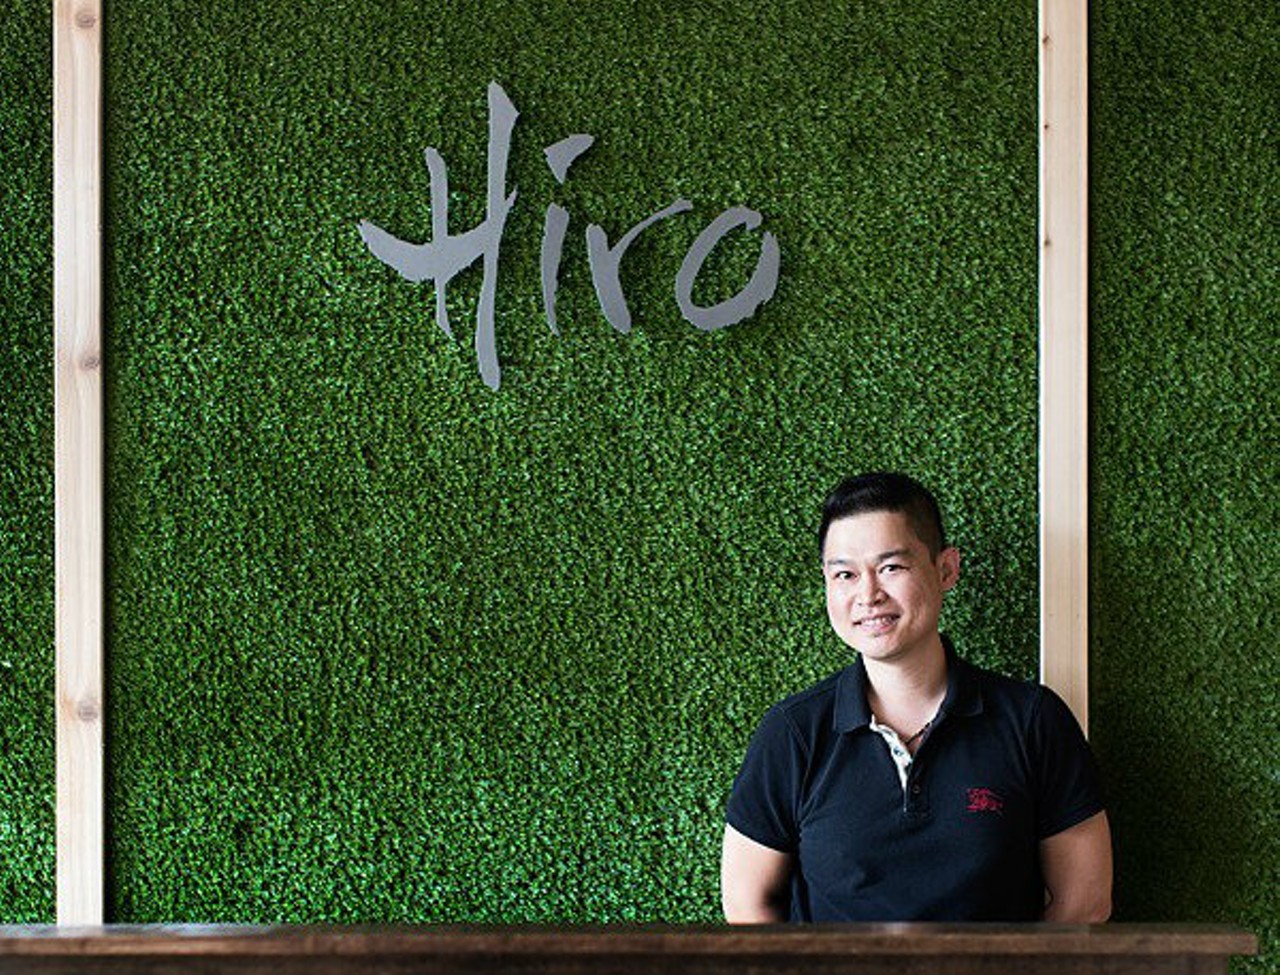 When Lee was first developing his concept for Hiro Asian Kitchen, he wondered if he would have to Americanize his menu. But thanks to some inspiration from his mother, "I went into Hiro and told my cooks, 'I want you to show me what reminds you of home. Cook what your mom cooks. Cook what your grandma cooks.' If people don't like it, we can always change it, but I was confident that people would respond to our food." And he was right. Photo by Jennifer Silverberg.